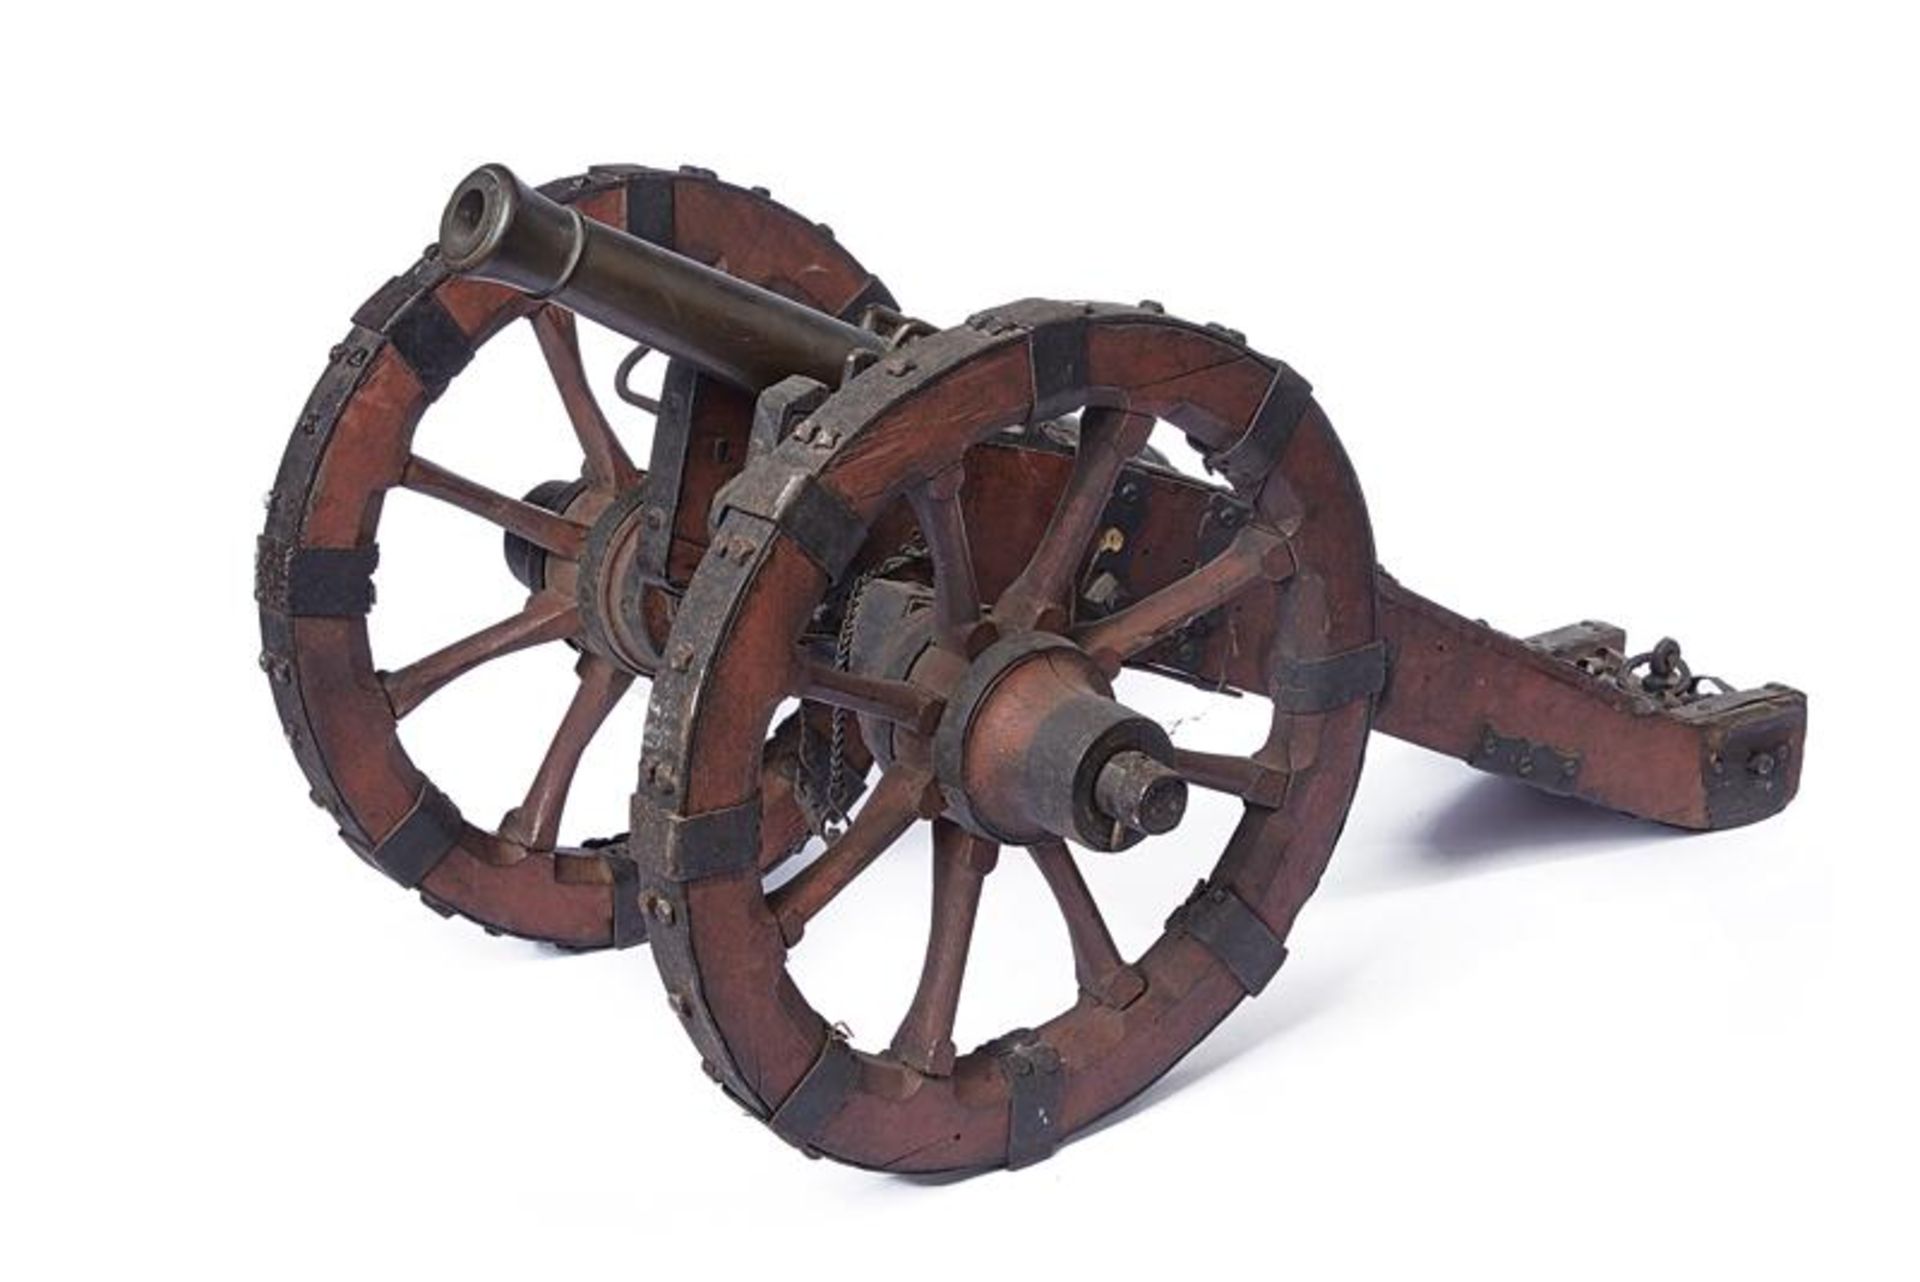 A cannon model with royal emblem